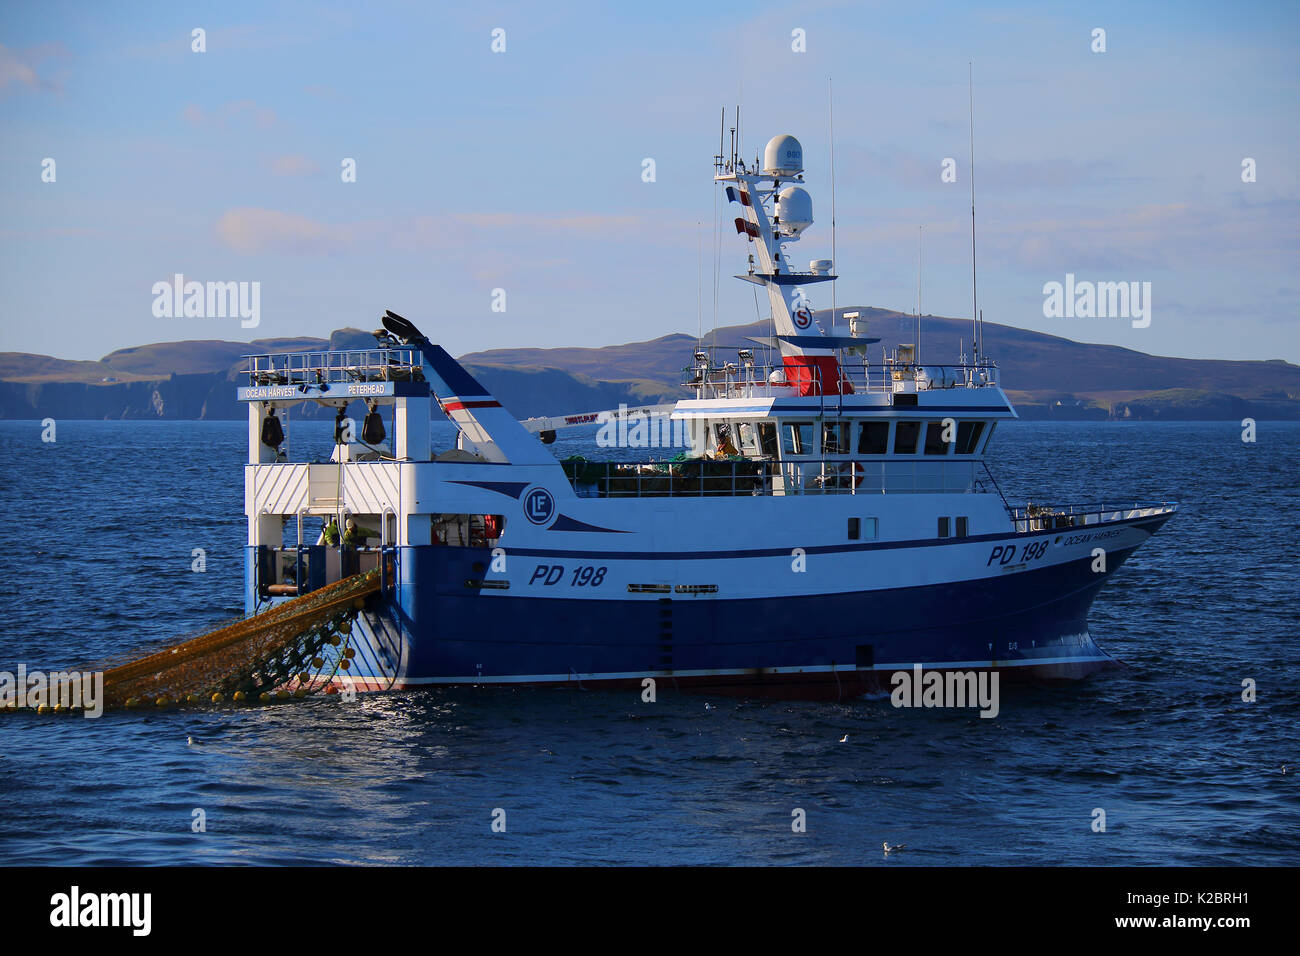 Fishing vessel 'Ocean Harvest' working in calm conditions with Fair Isle in the distance. North Sea, UK, August 2014. Property released.  All non-editorial uses must be cleared individually. Stock Photo